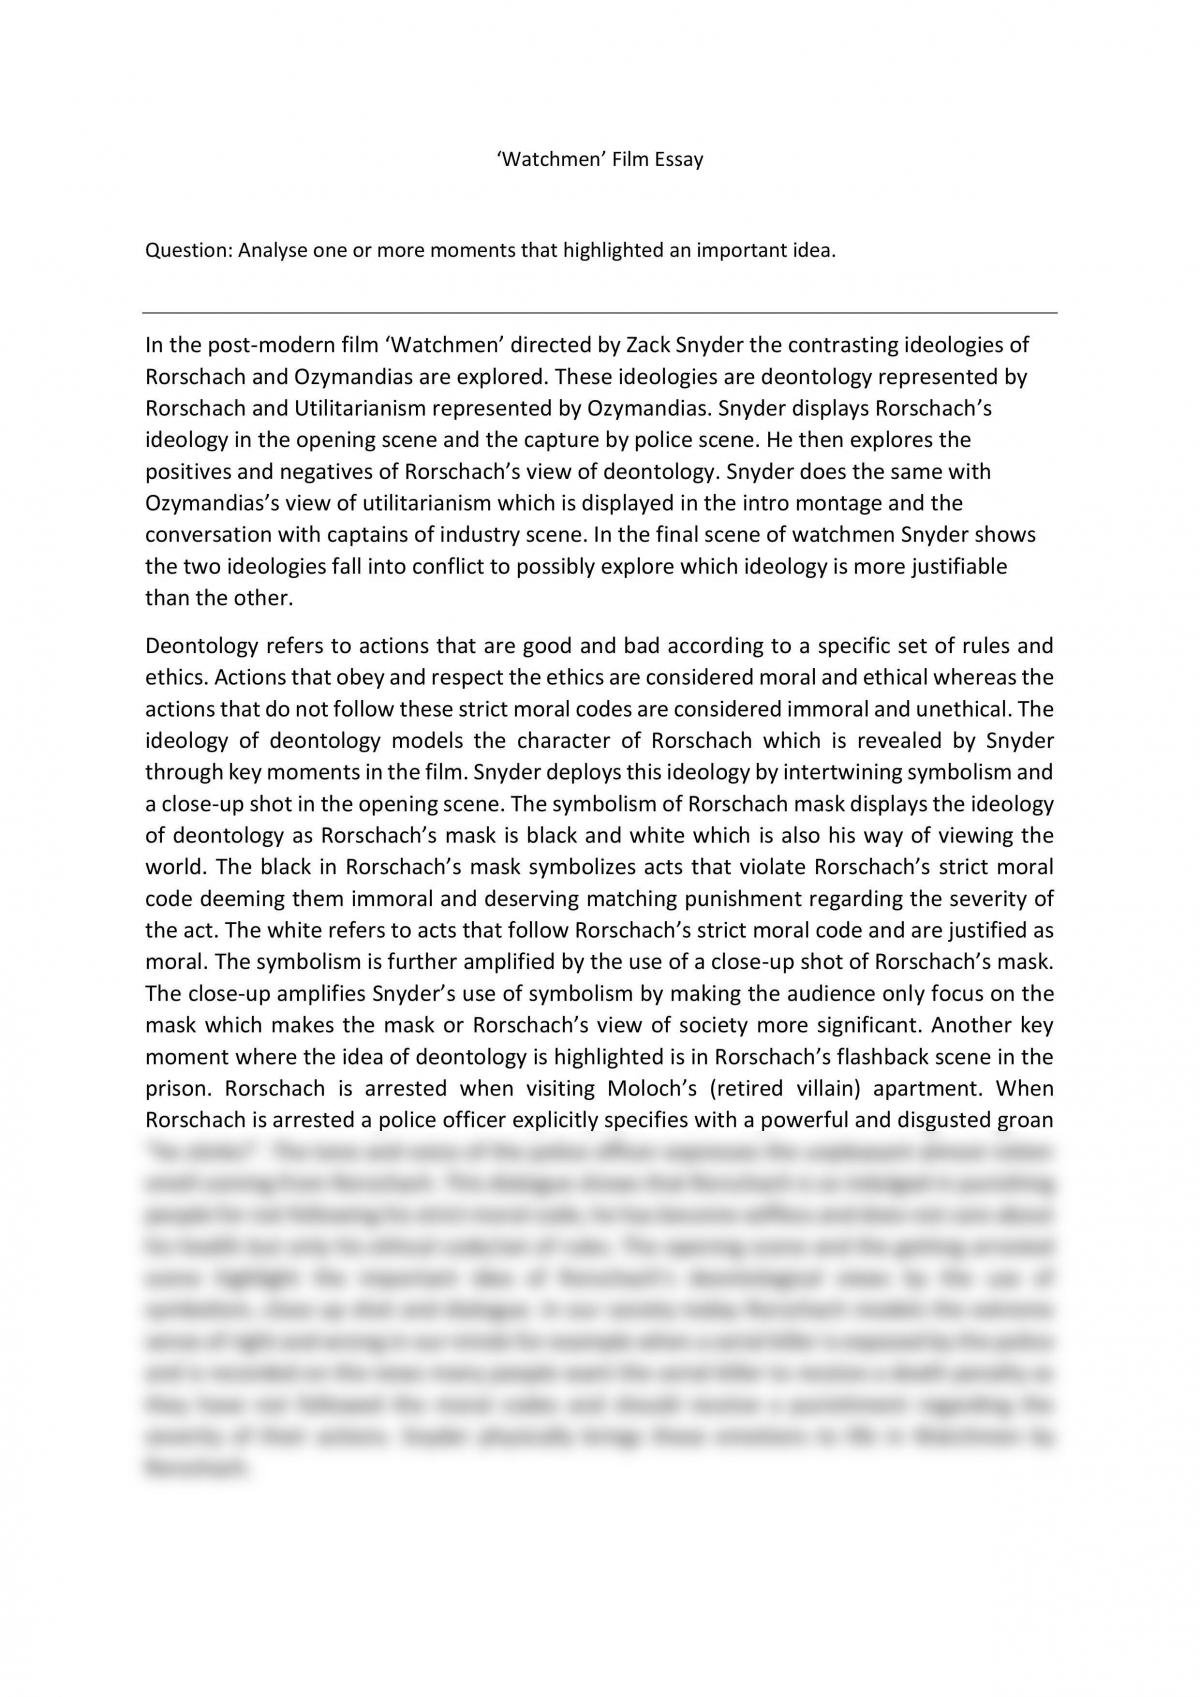 NCEA level 2 Visual Text Essay - Excellence - Page 1